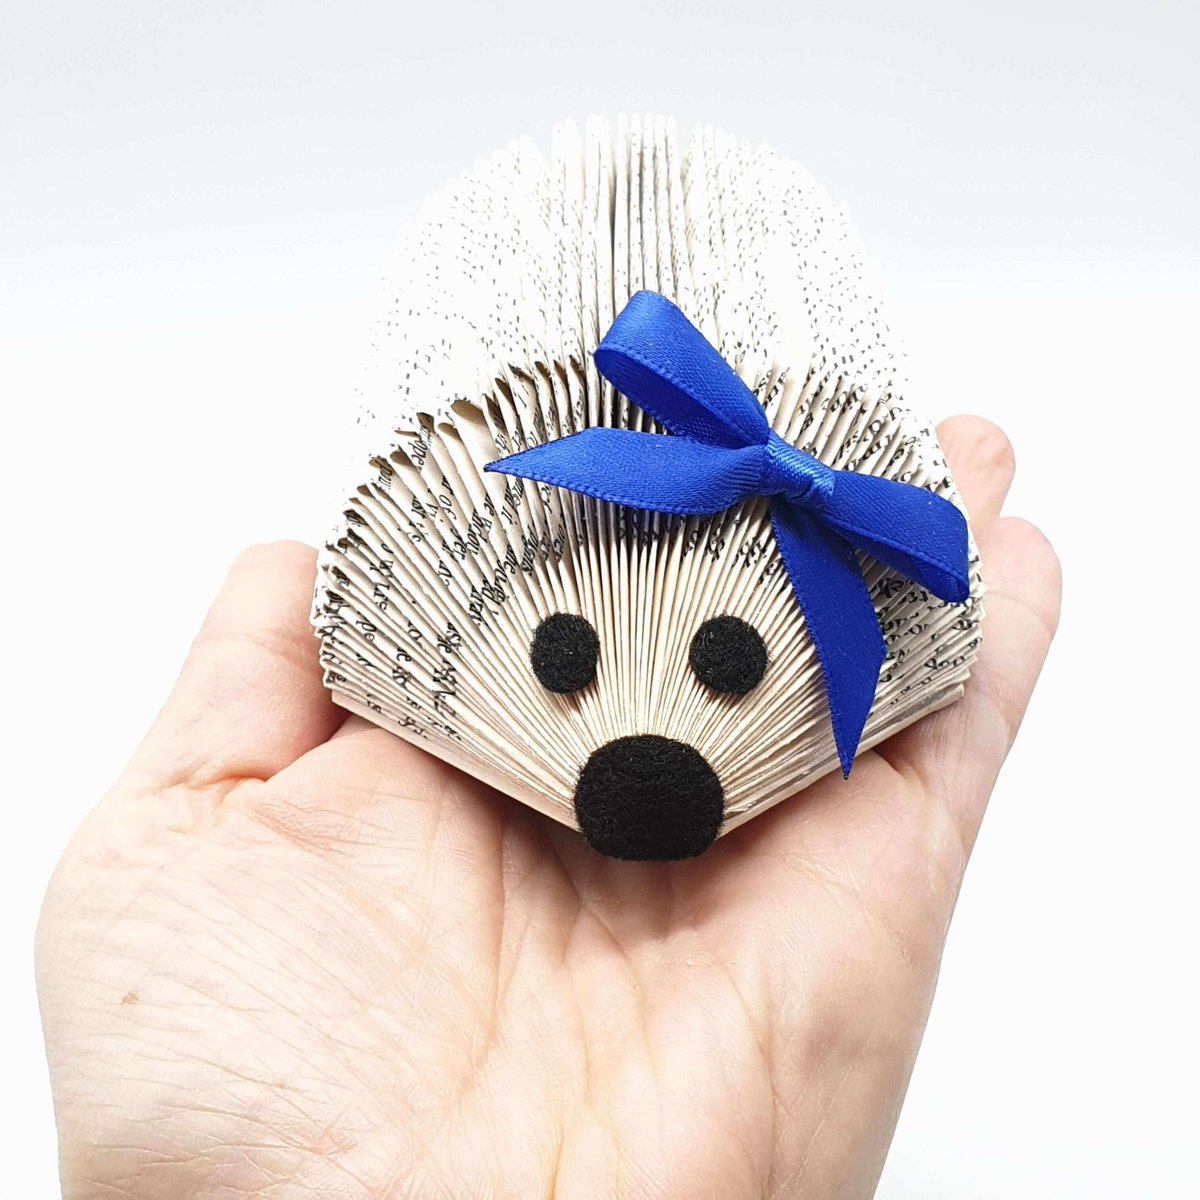 Hedgehog Business Card Holder Book Gift creatoncrafts.com/products/buisn… #CreatonCrafts #mhhsbd #Shopify #BookHedgehog